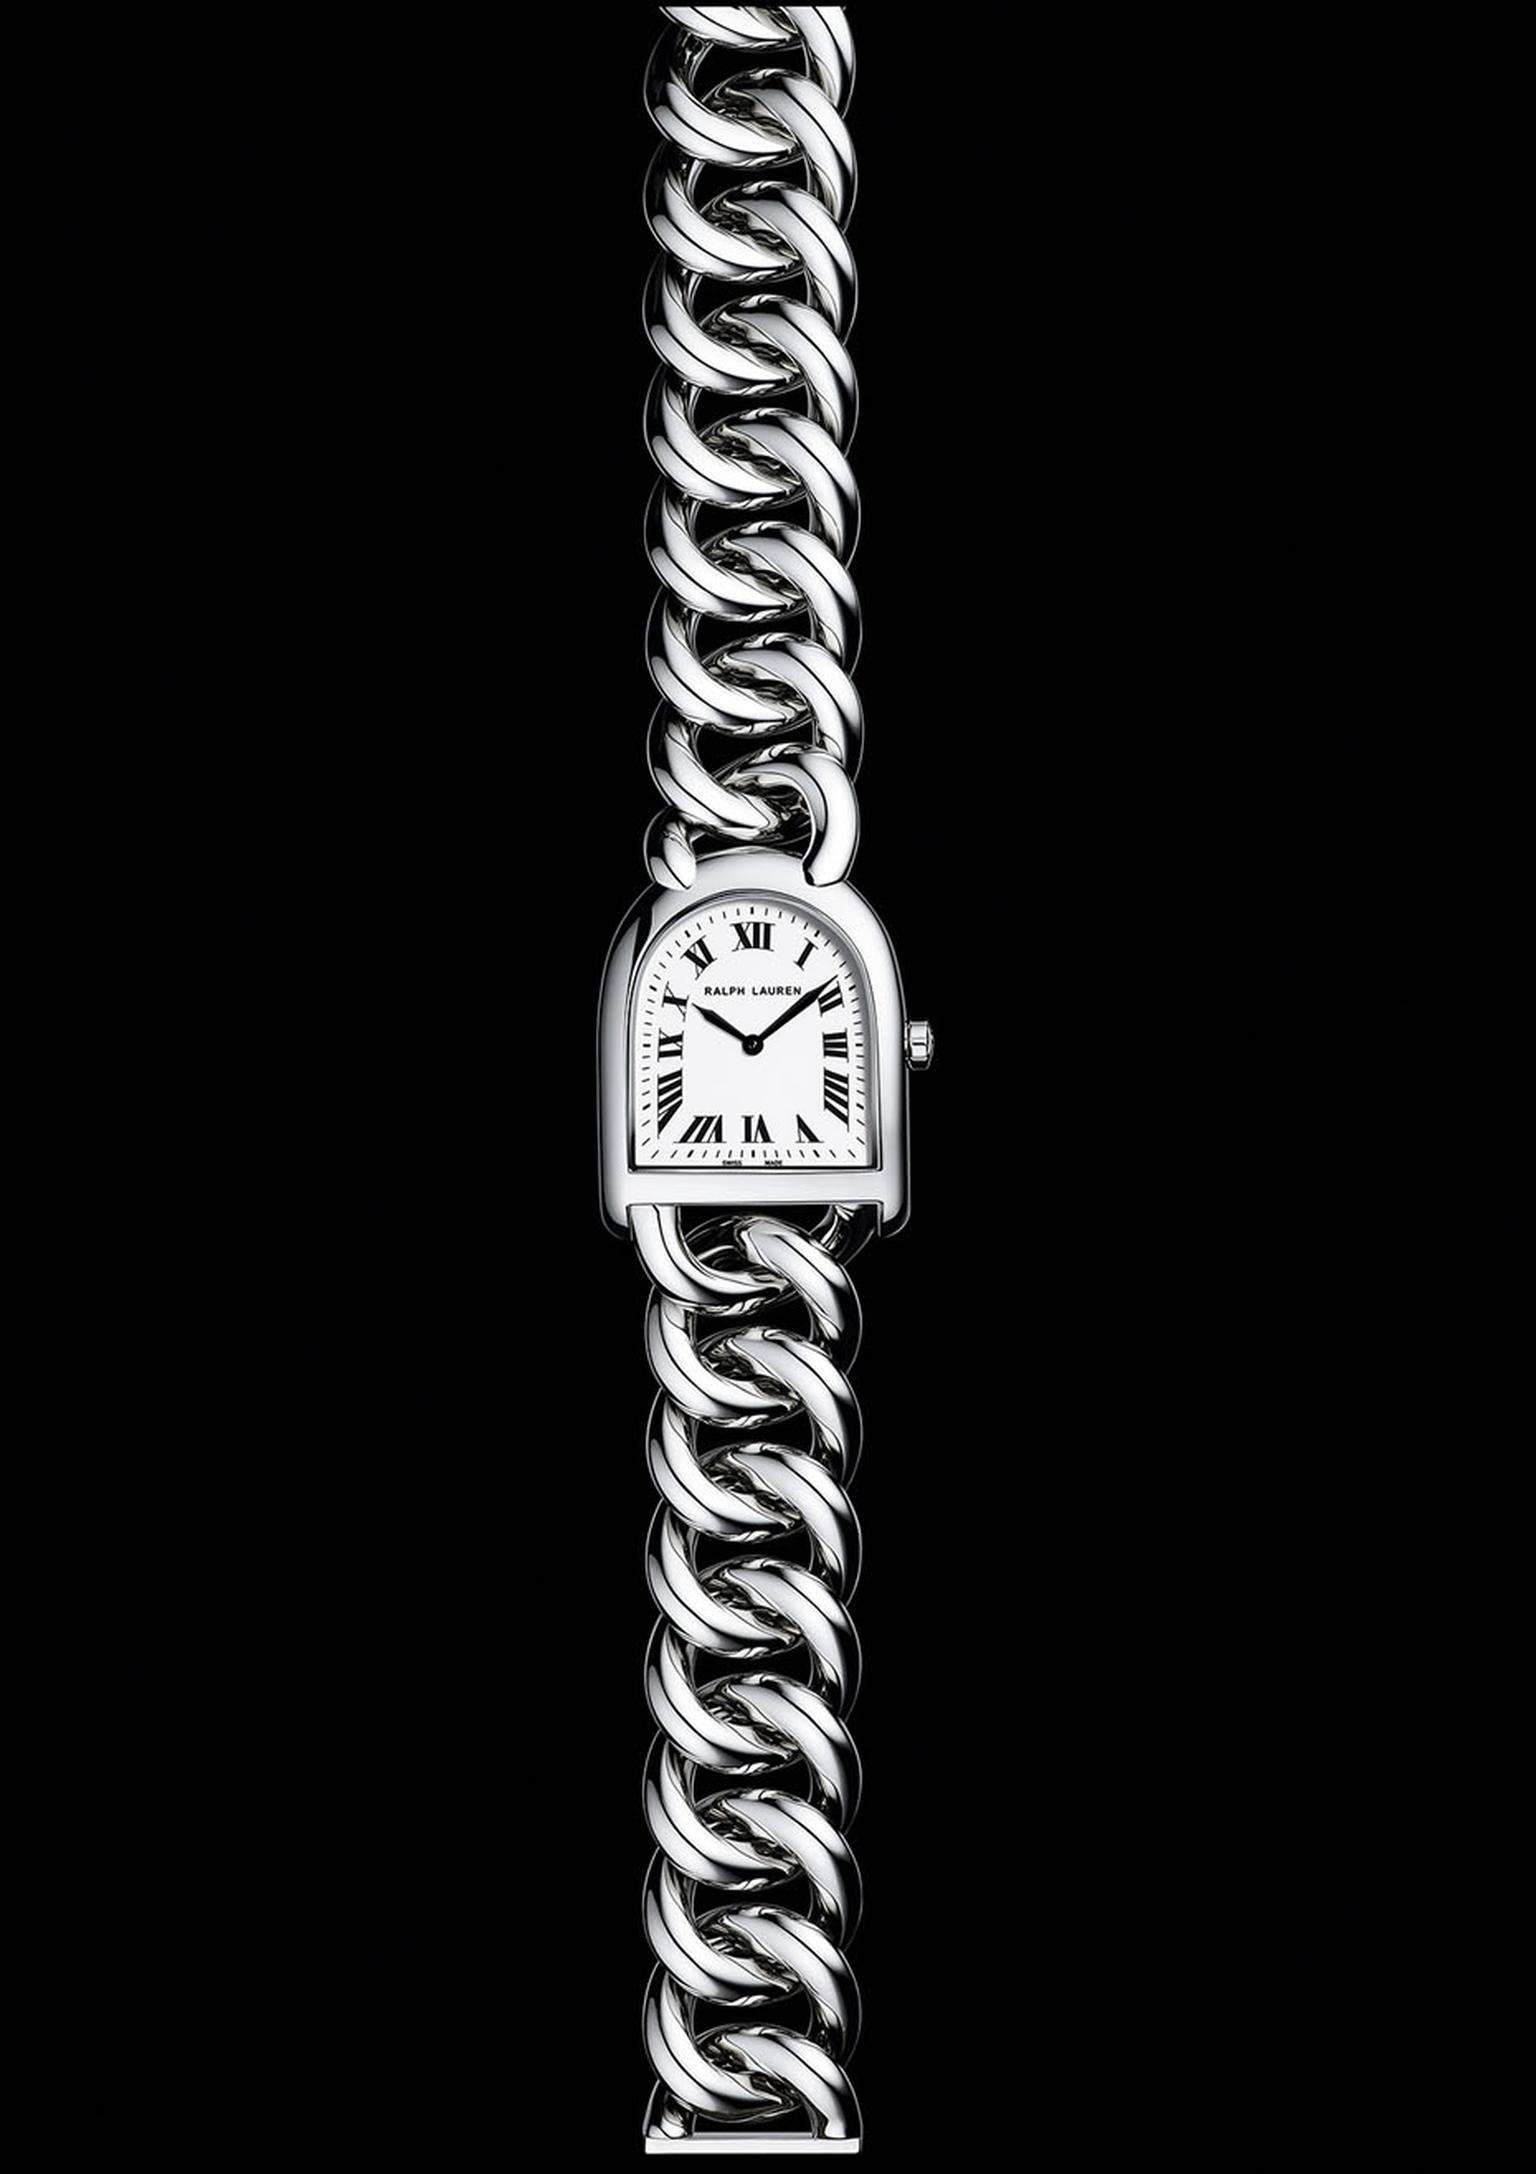 The new Ralph Lauren Stirrup Petit Link is, at just 23.3mm across, daintier than any Stirrup watch that has preceded it.